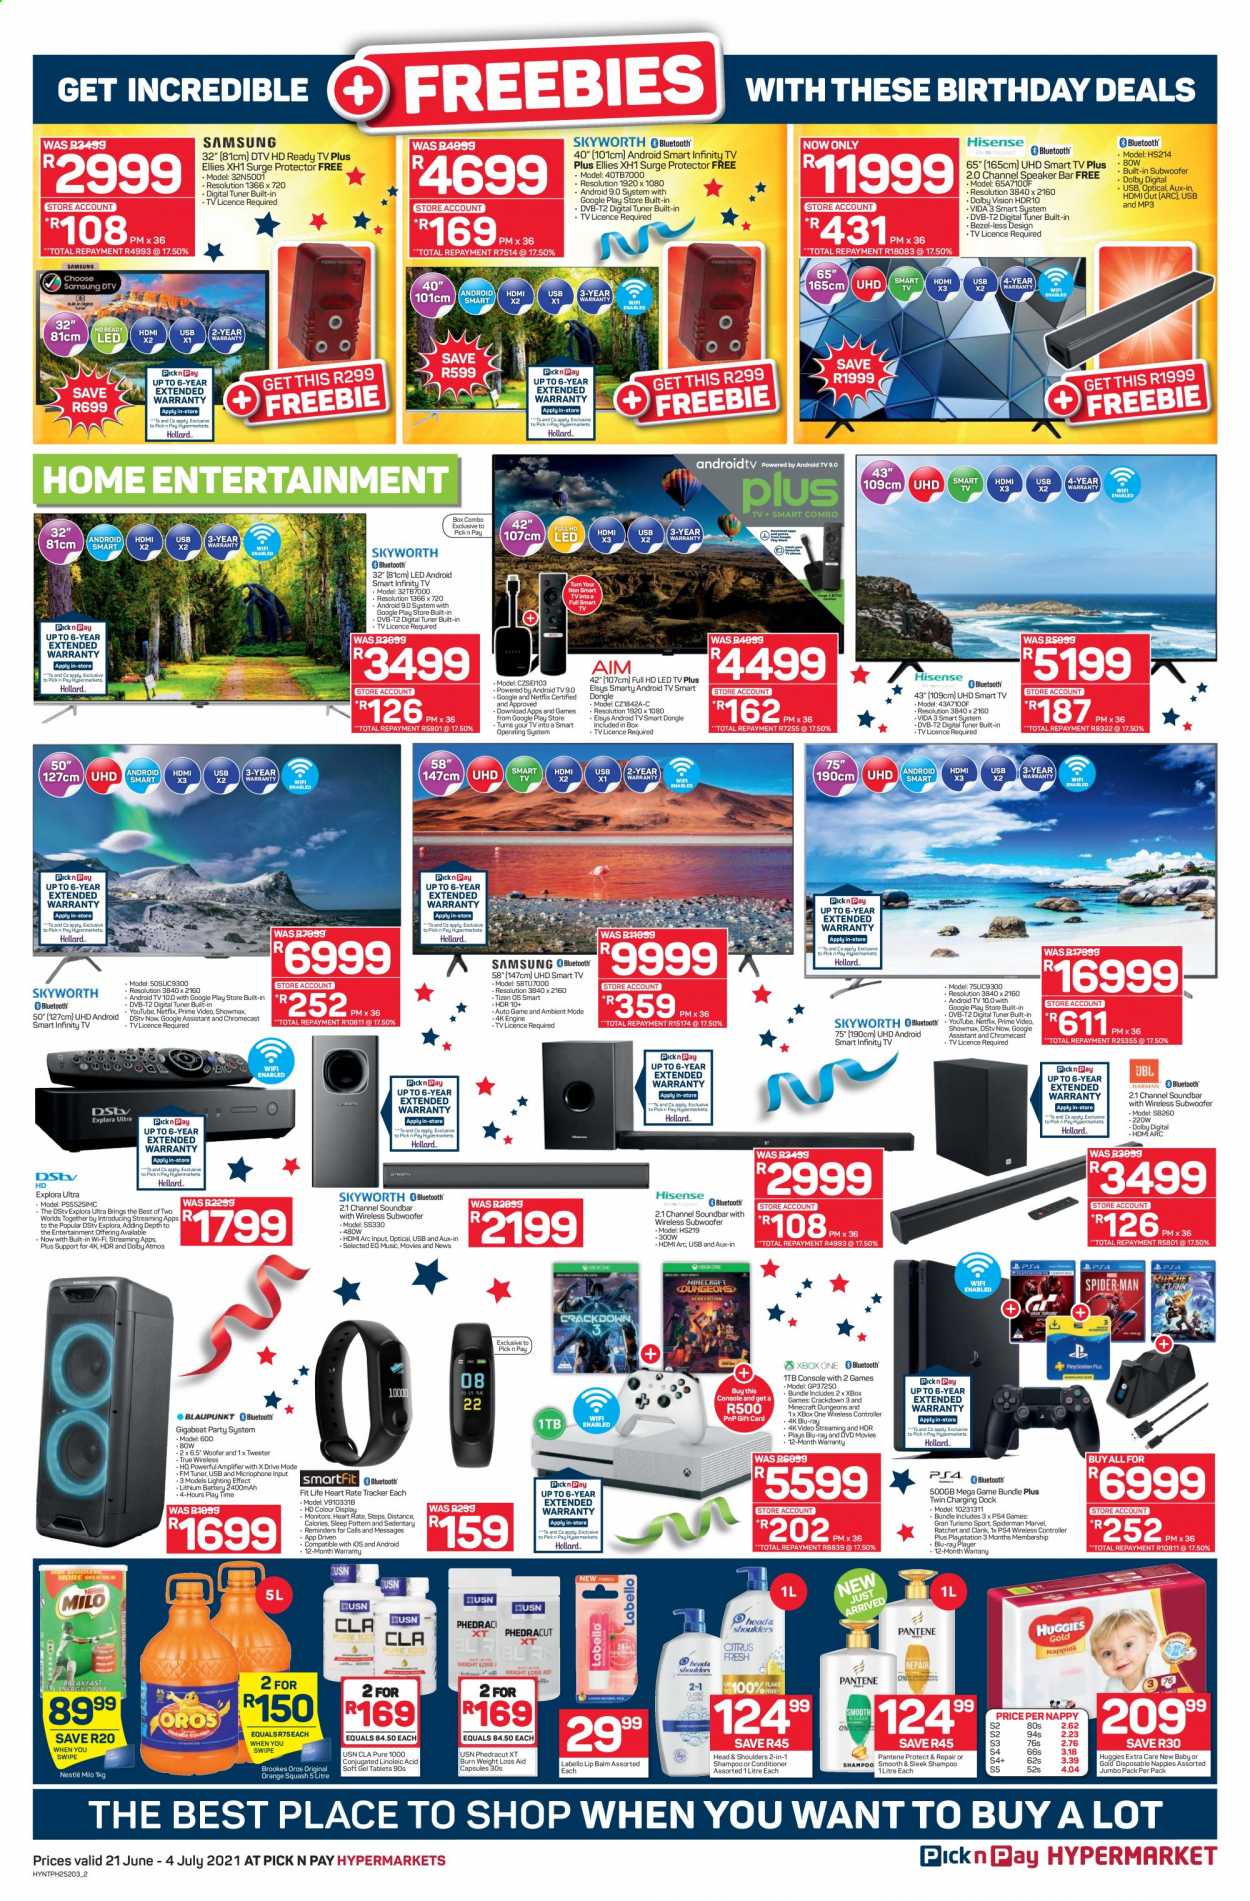 Pick n Pay specials - 06.21.2021 - 07.04.2021. 